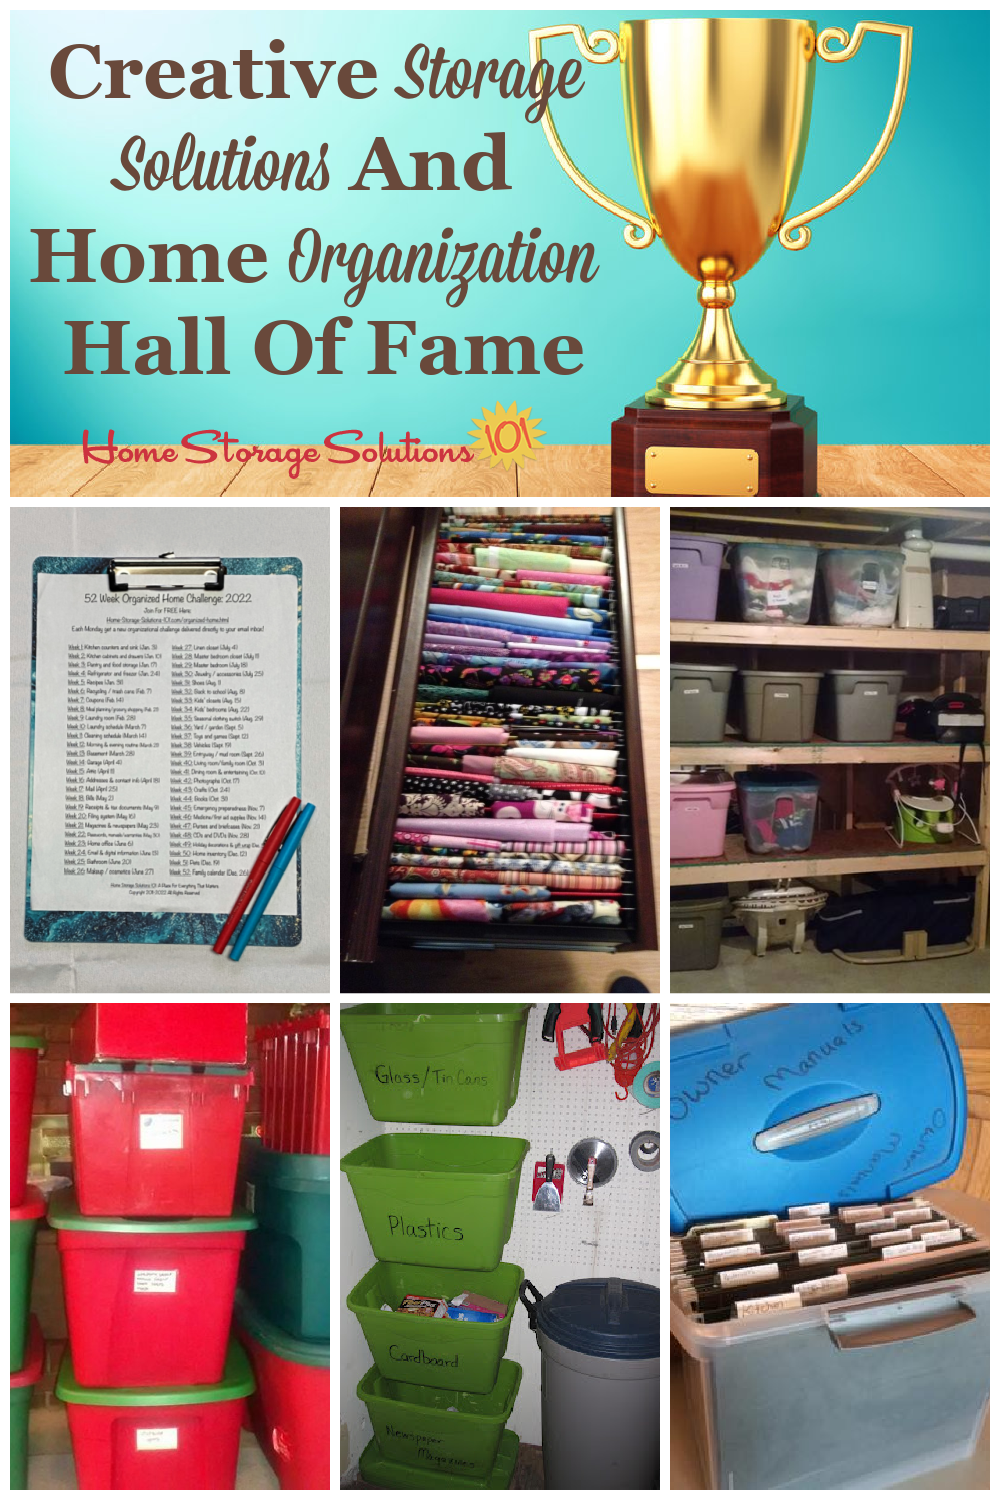 Creative Storage Solutions And Home Organization Hall Of Fame